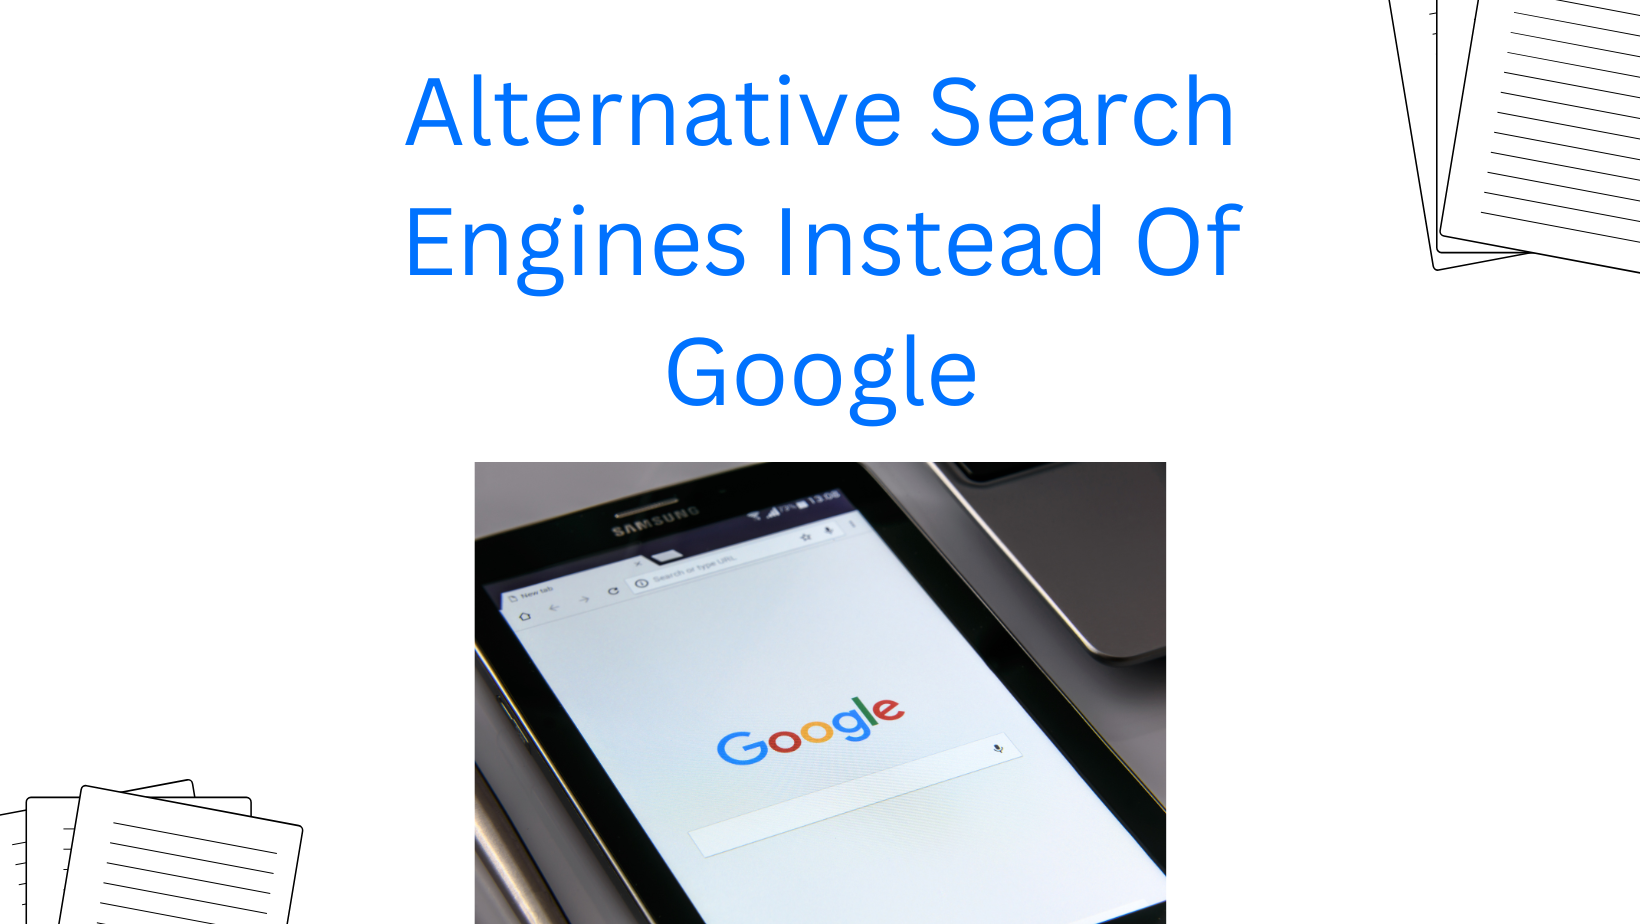 Alternative Search Engines Instead Of Google